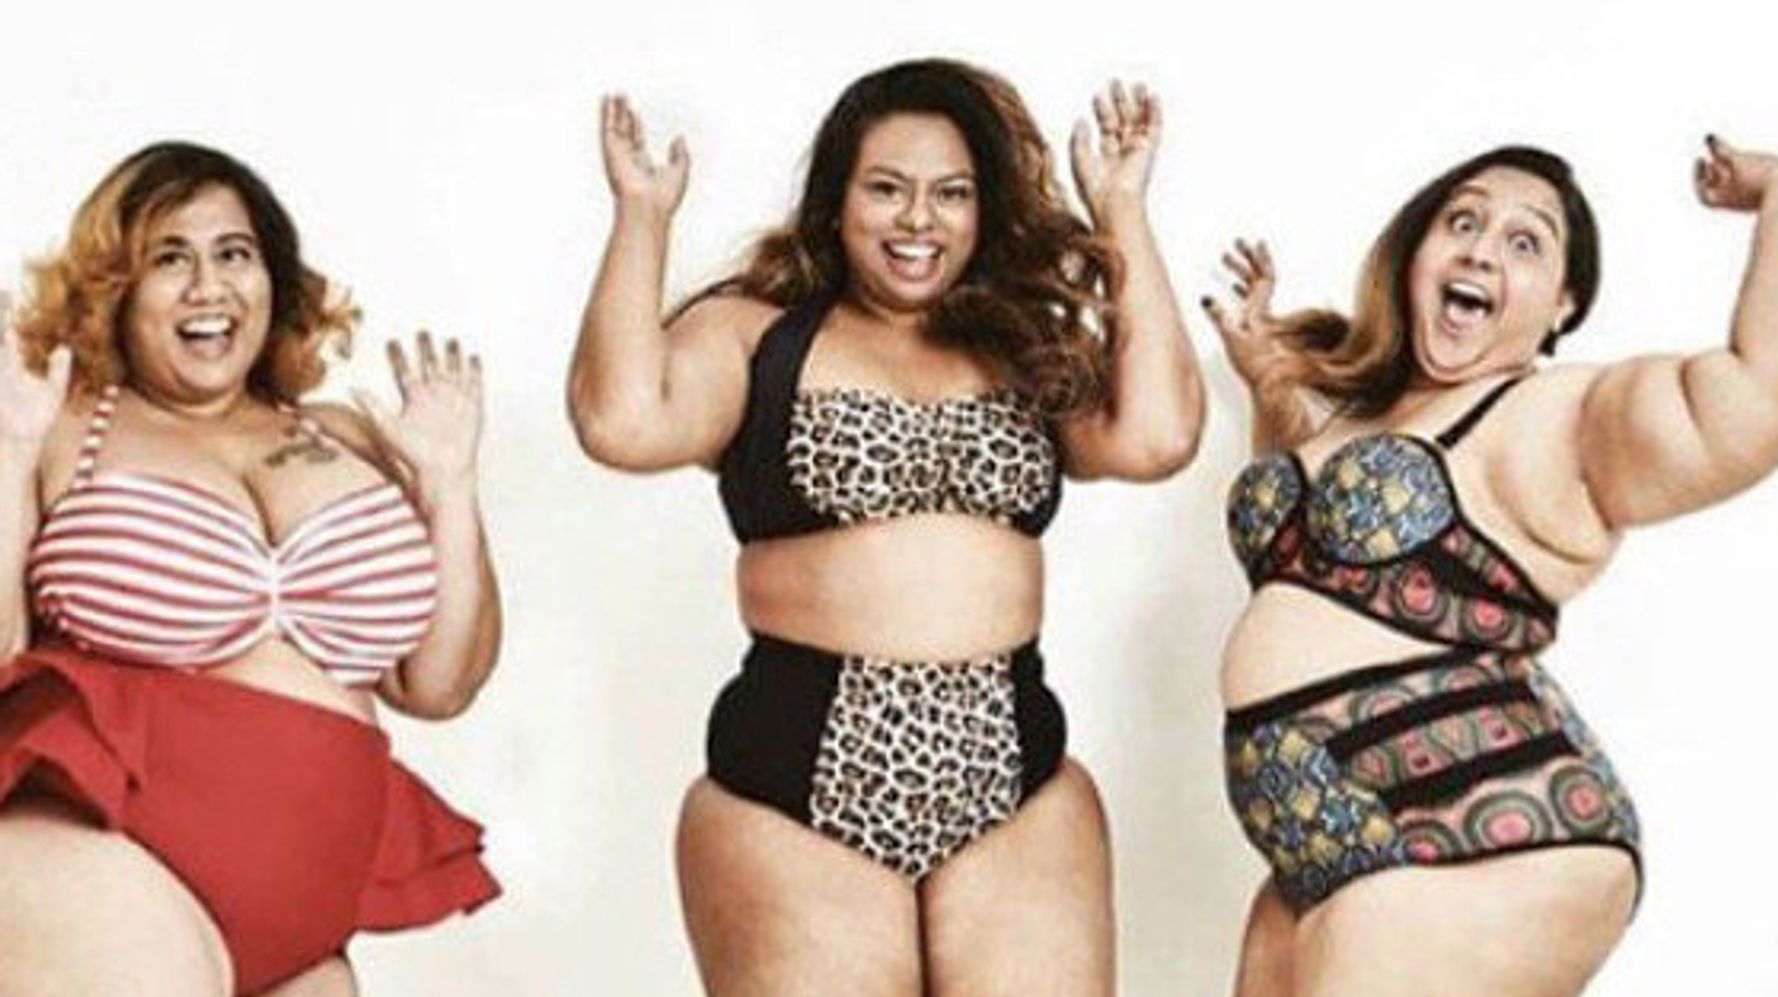 Fat Nude Resort - Did We Violate Instagram Guidelines By Being 'Too Fat' To Wear A Swimsuit?  | HuffPost News